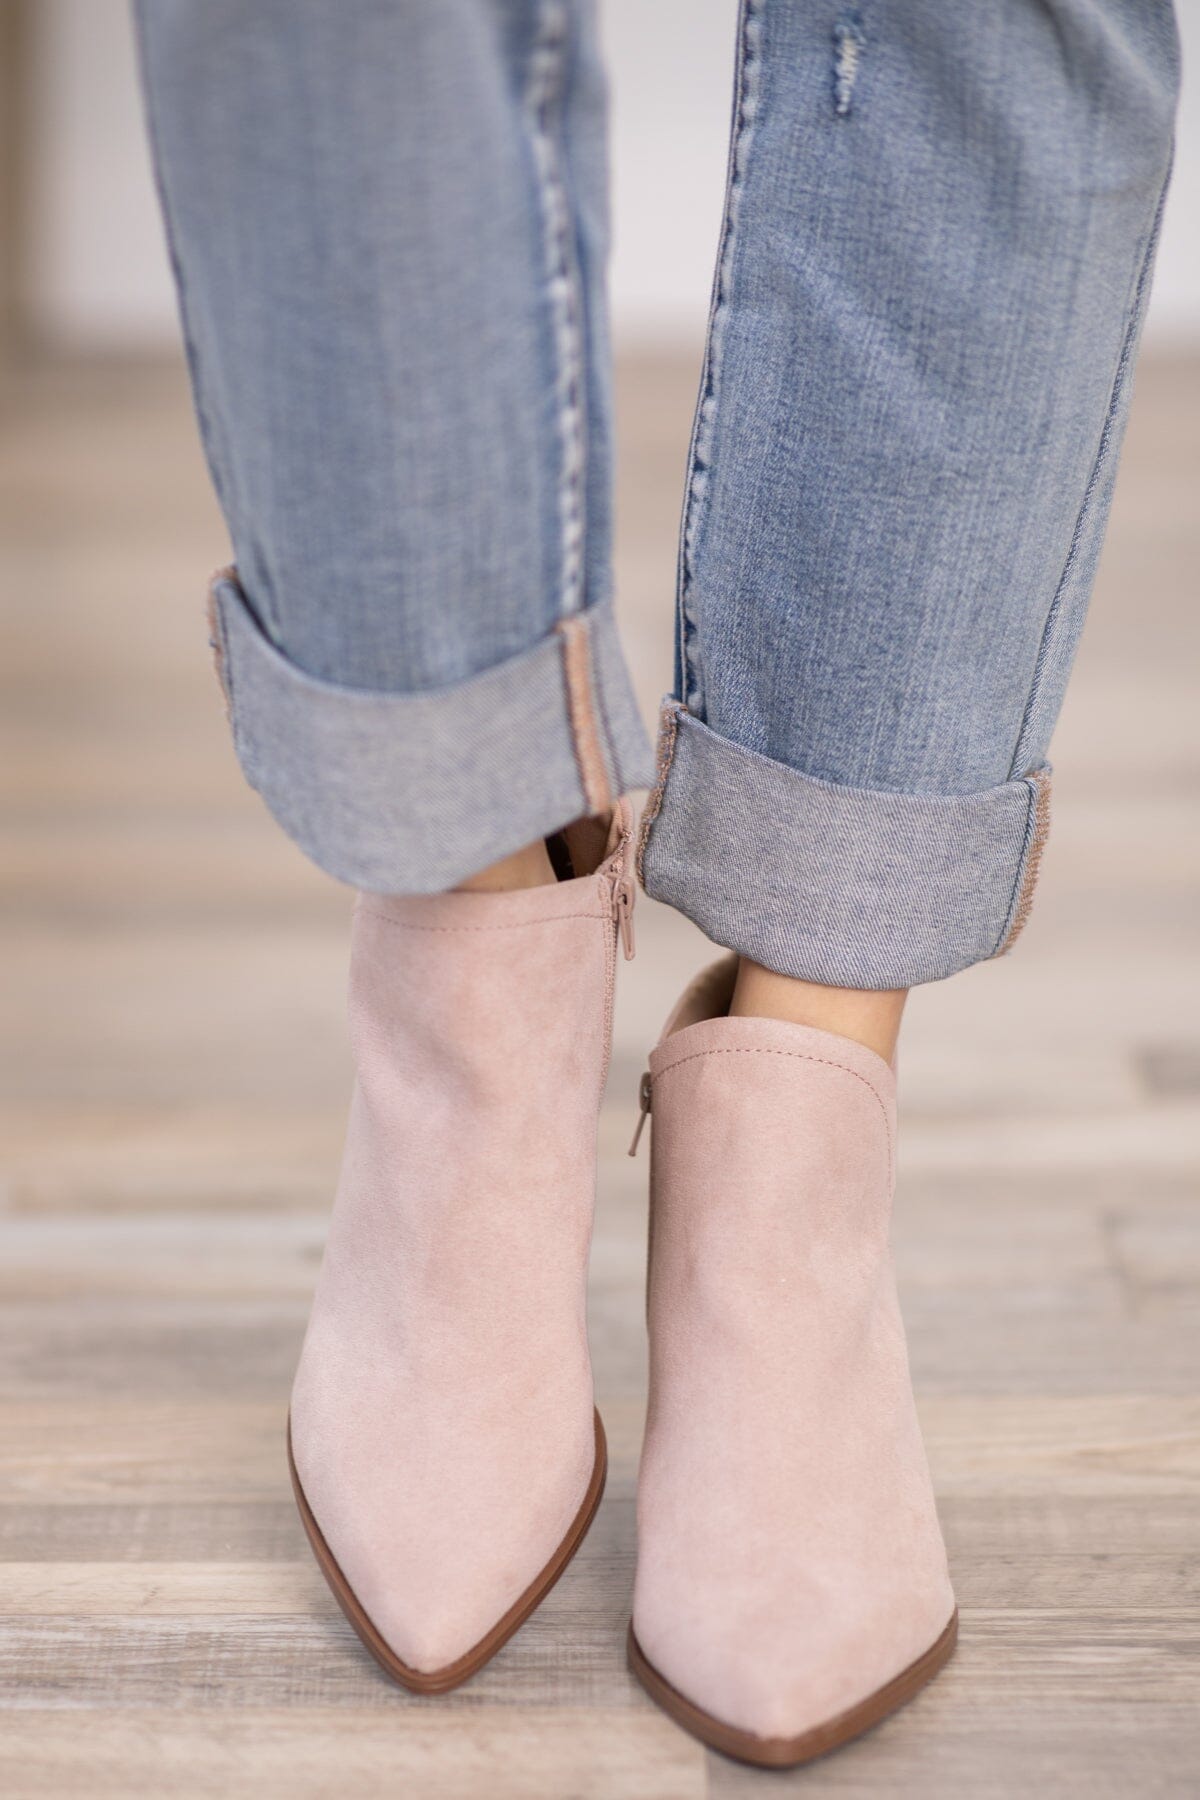 Beige Suede Heeled Bootie - Filly Flair